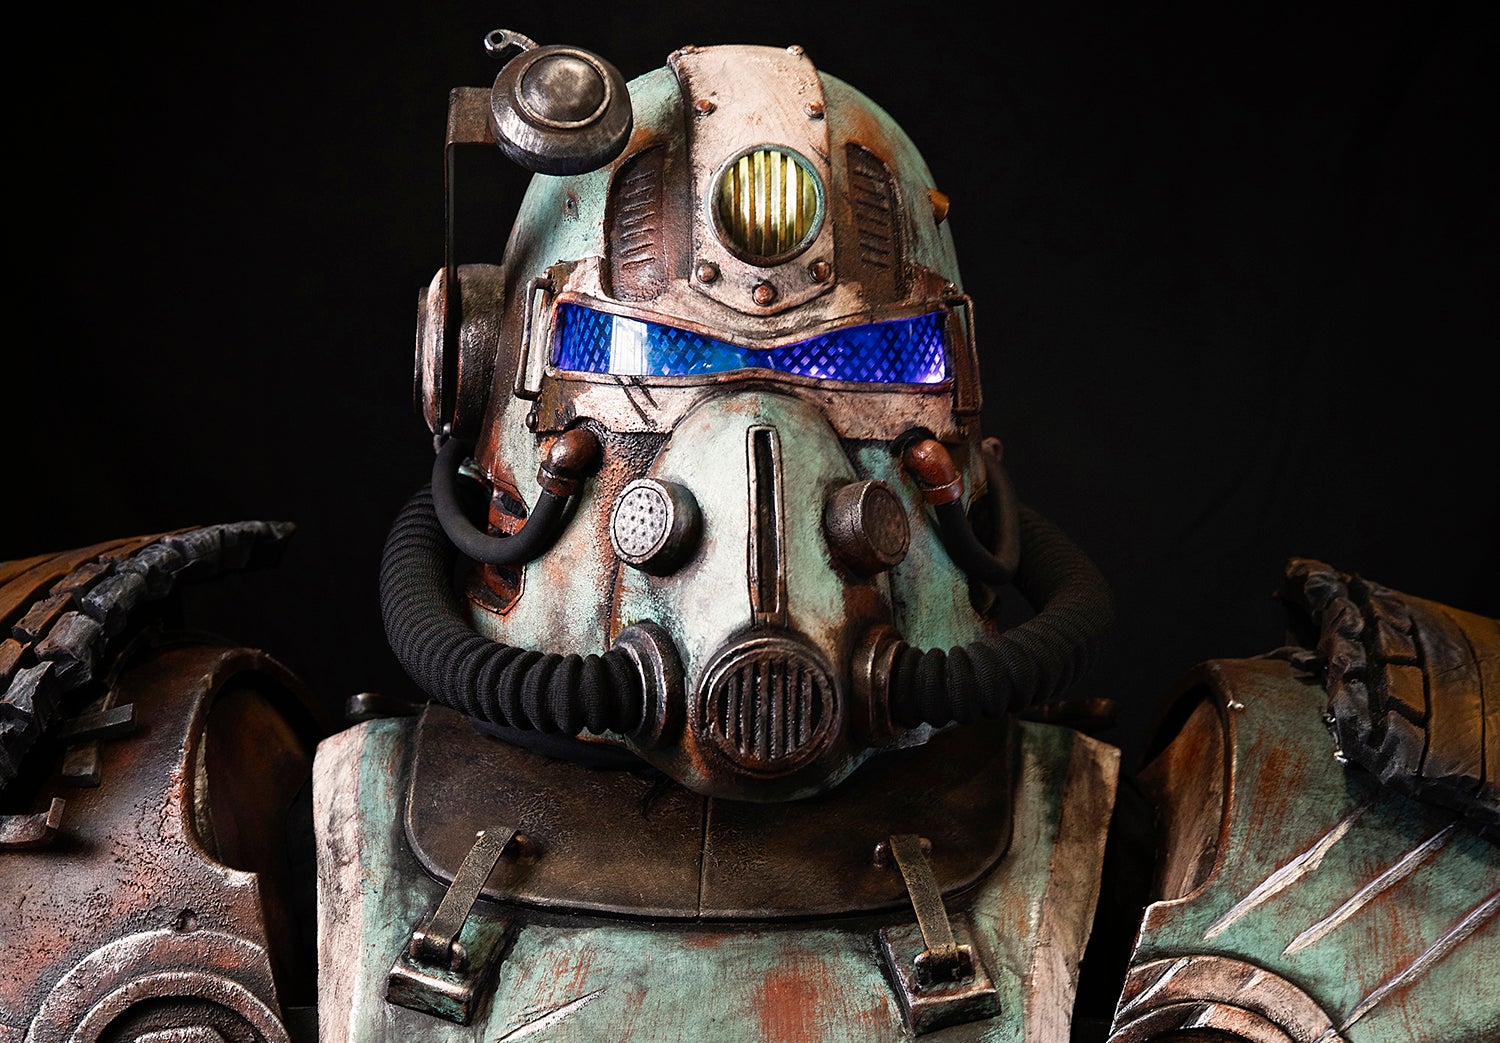 Cosplayer Well Rusted Workshop displays his T-51 Power Armor from Fallout.